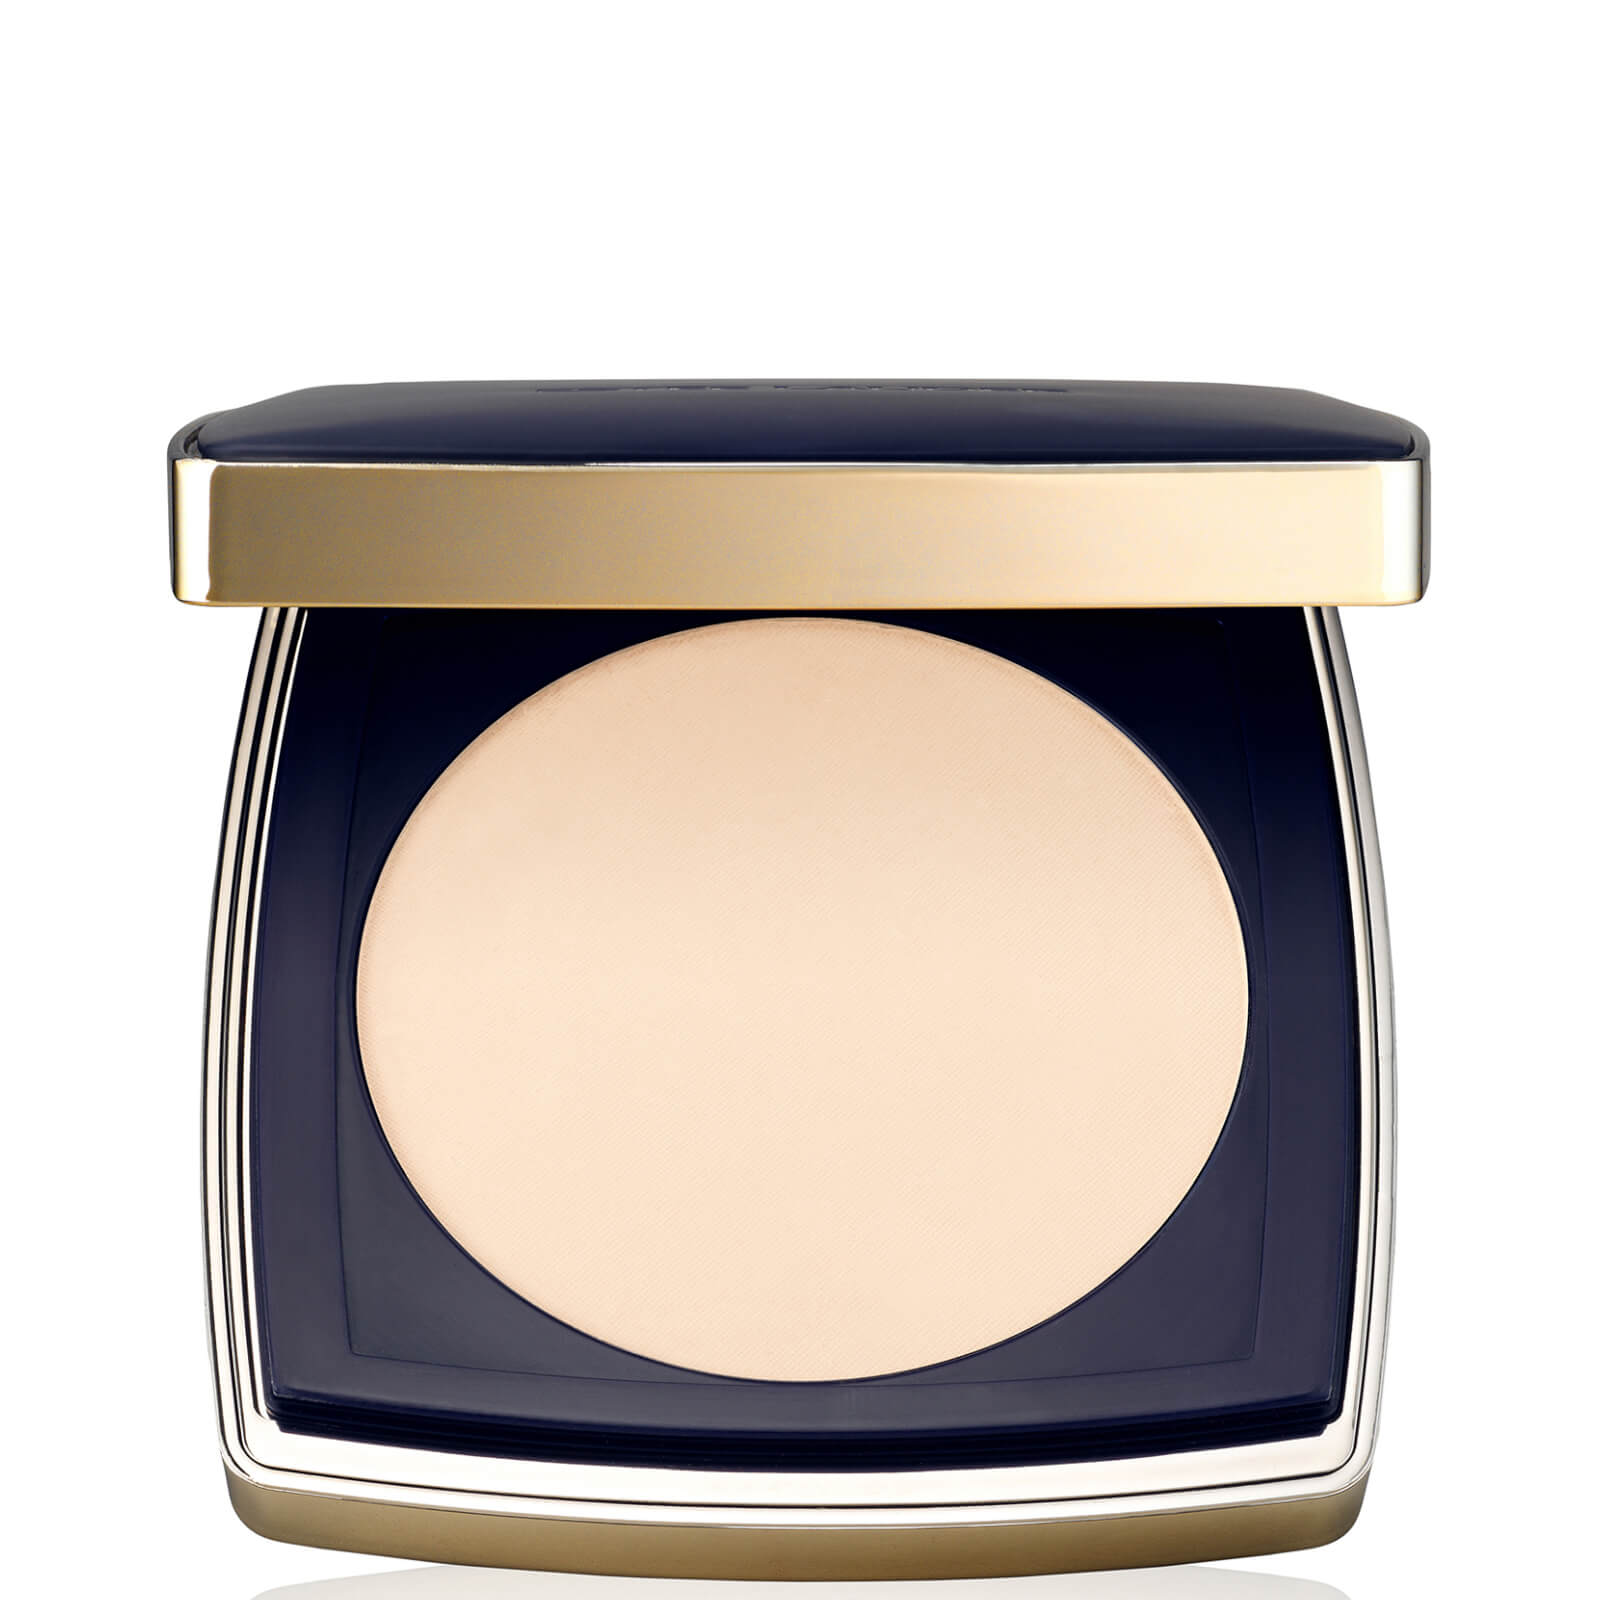 Estee Lauder Double Wear Stay-in-Place Matte Powder Foundation SPF10 12g (Various Shades) - 1N2 Ecru